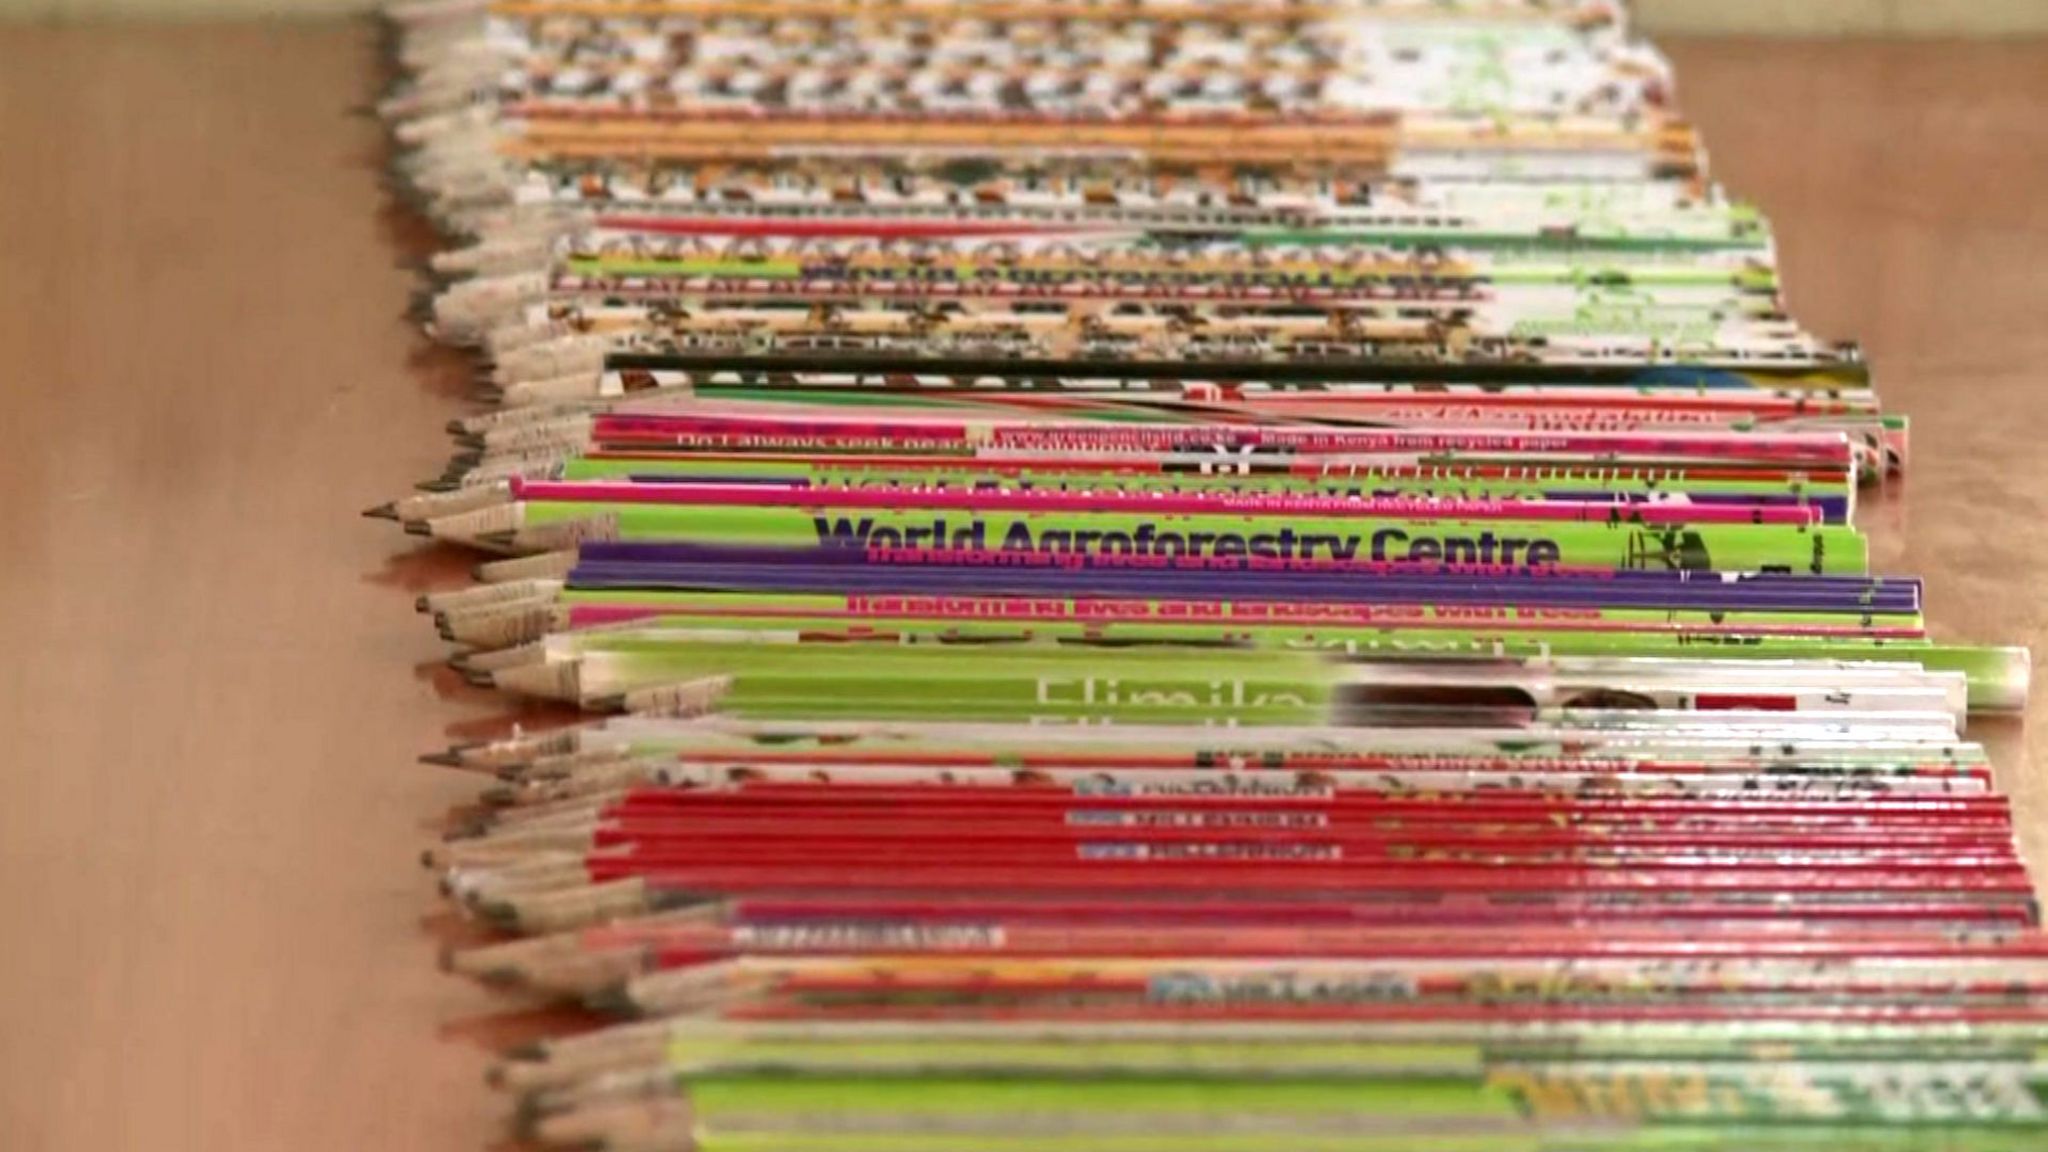 Recycled pencils